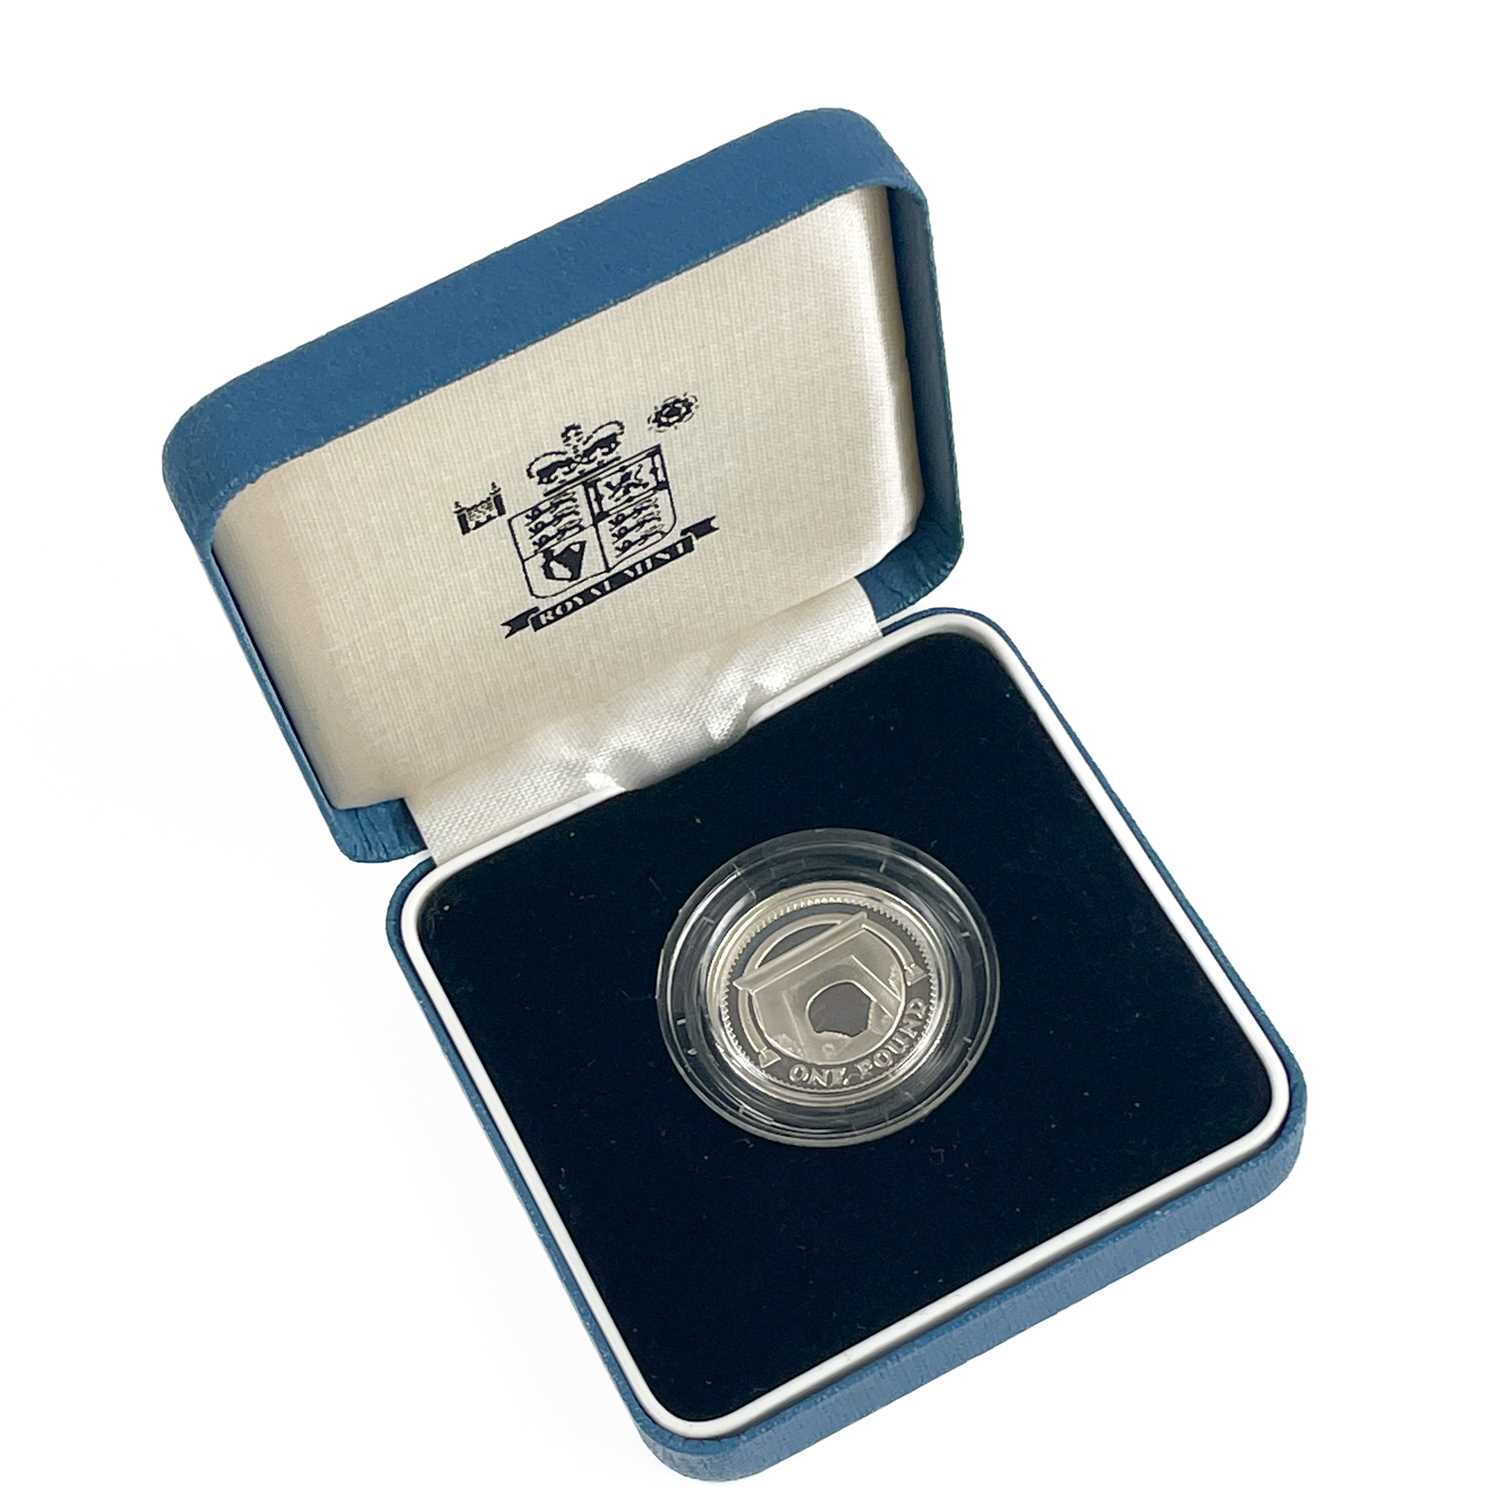 UK Silver Proof £1 Coins 2006 to 2009 (8 coins) in Royal Mint Coin Cases. - Image 6 of 8